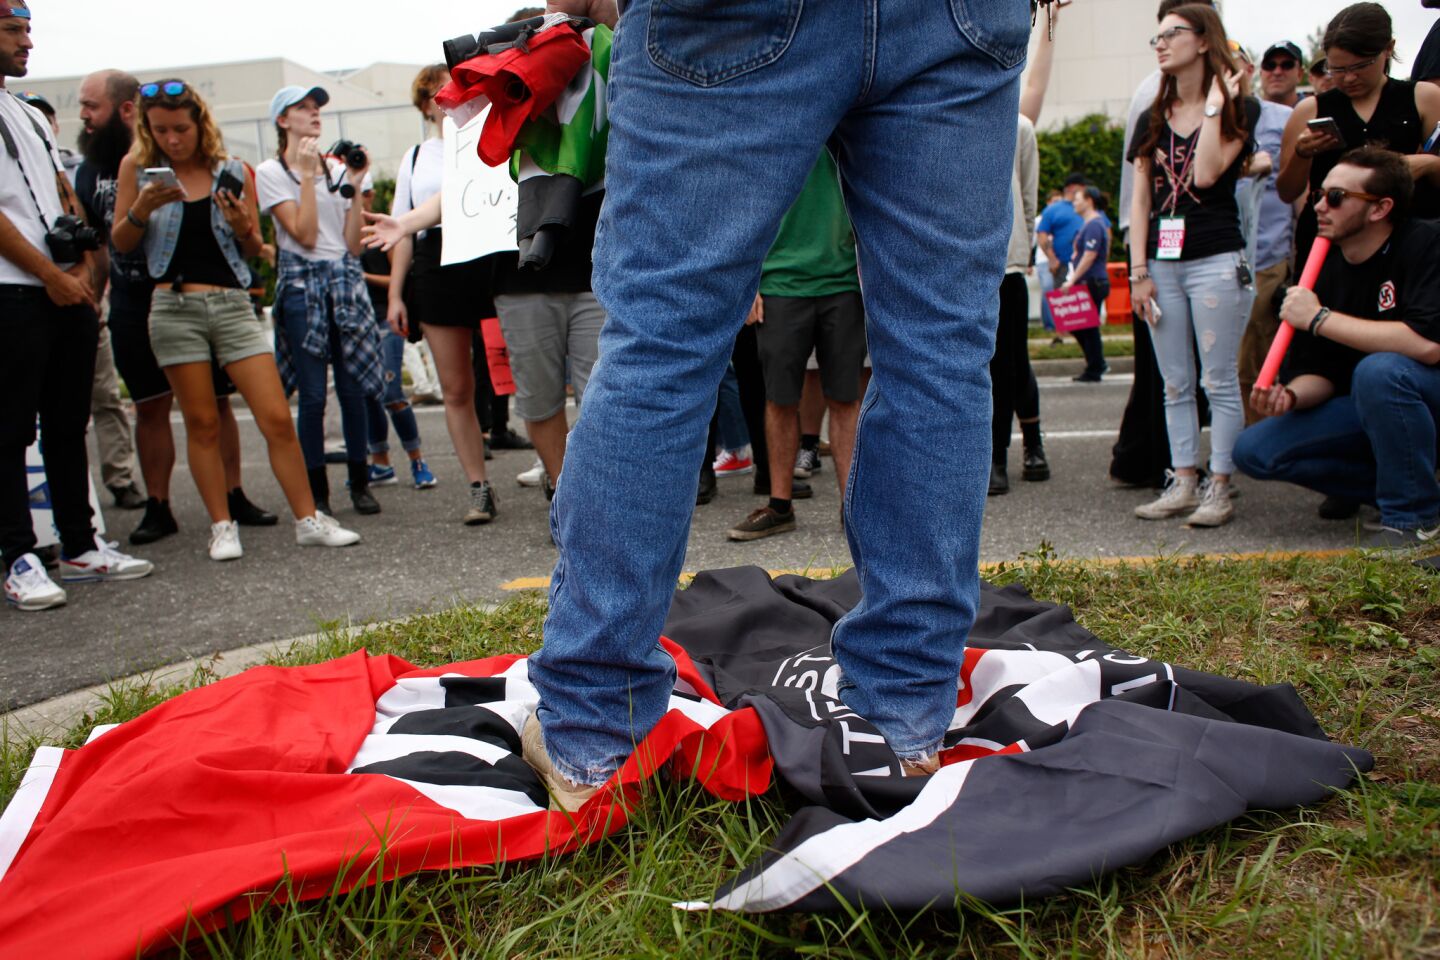 A man stands on a Nazi flag and an Antifa flag near the site of a planned speech by white nationalist Richard Spencer at the University of Florida campus in Gainesville.